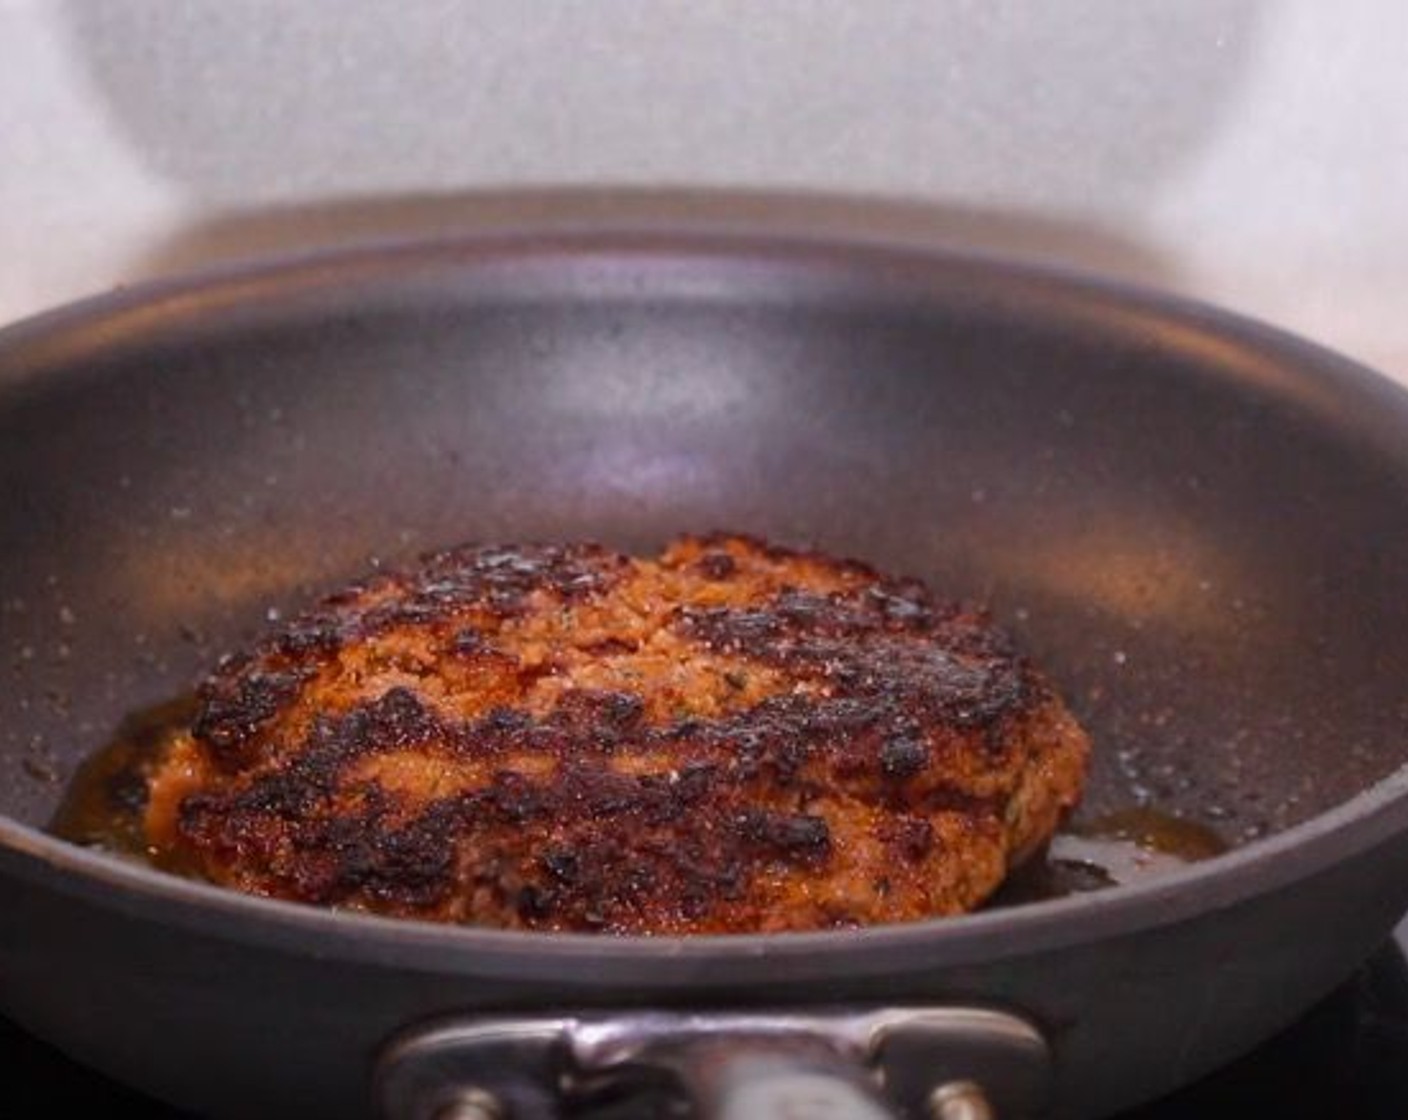 step 7 In a pan over high heat with no oil, sear the patty for 4 minutes.